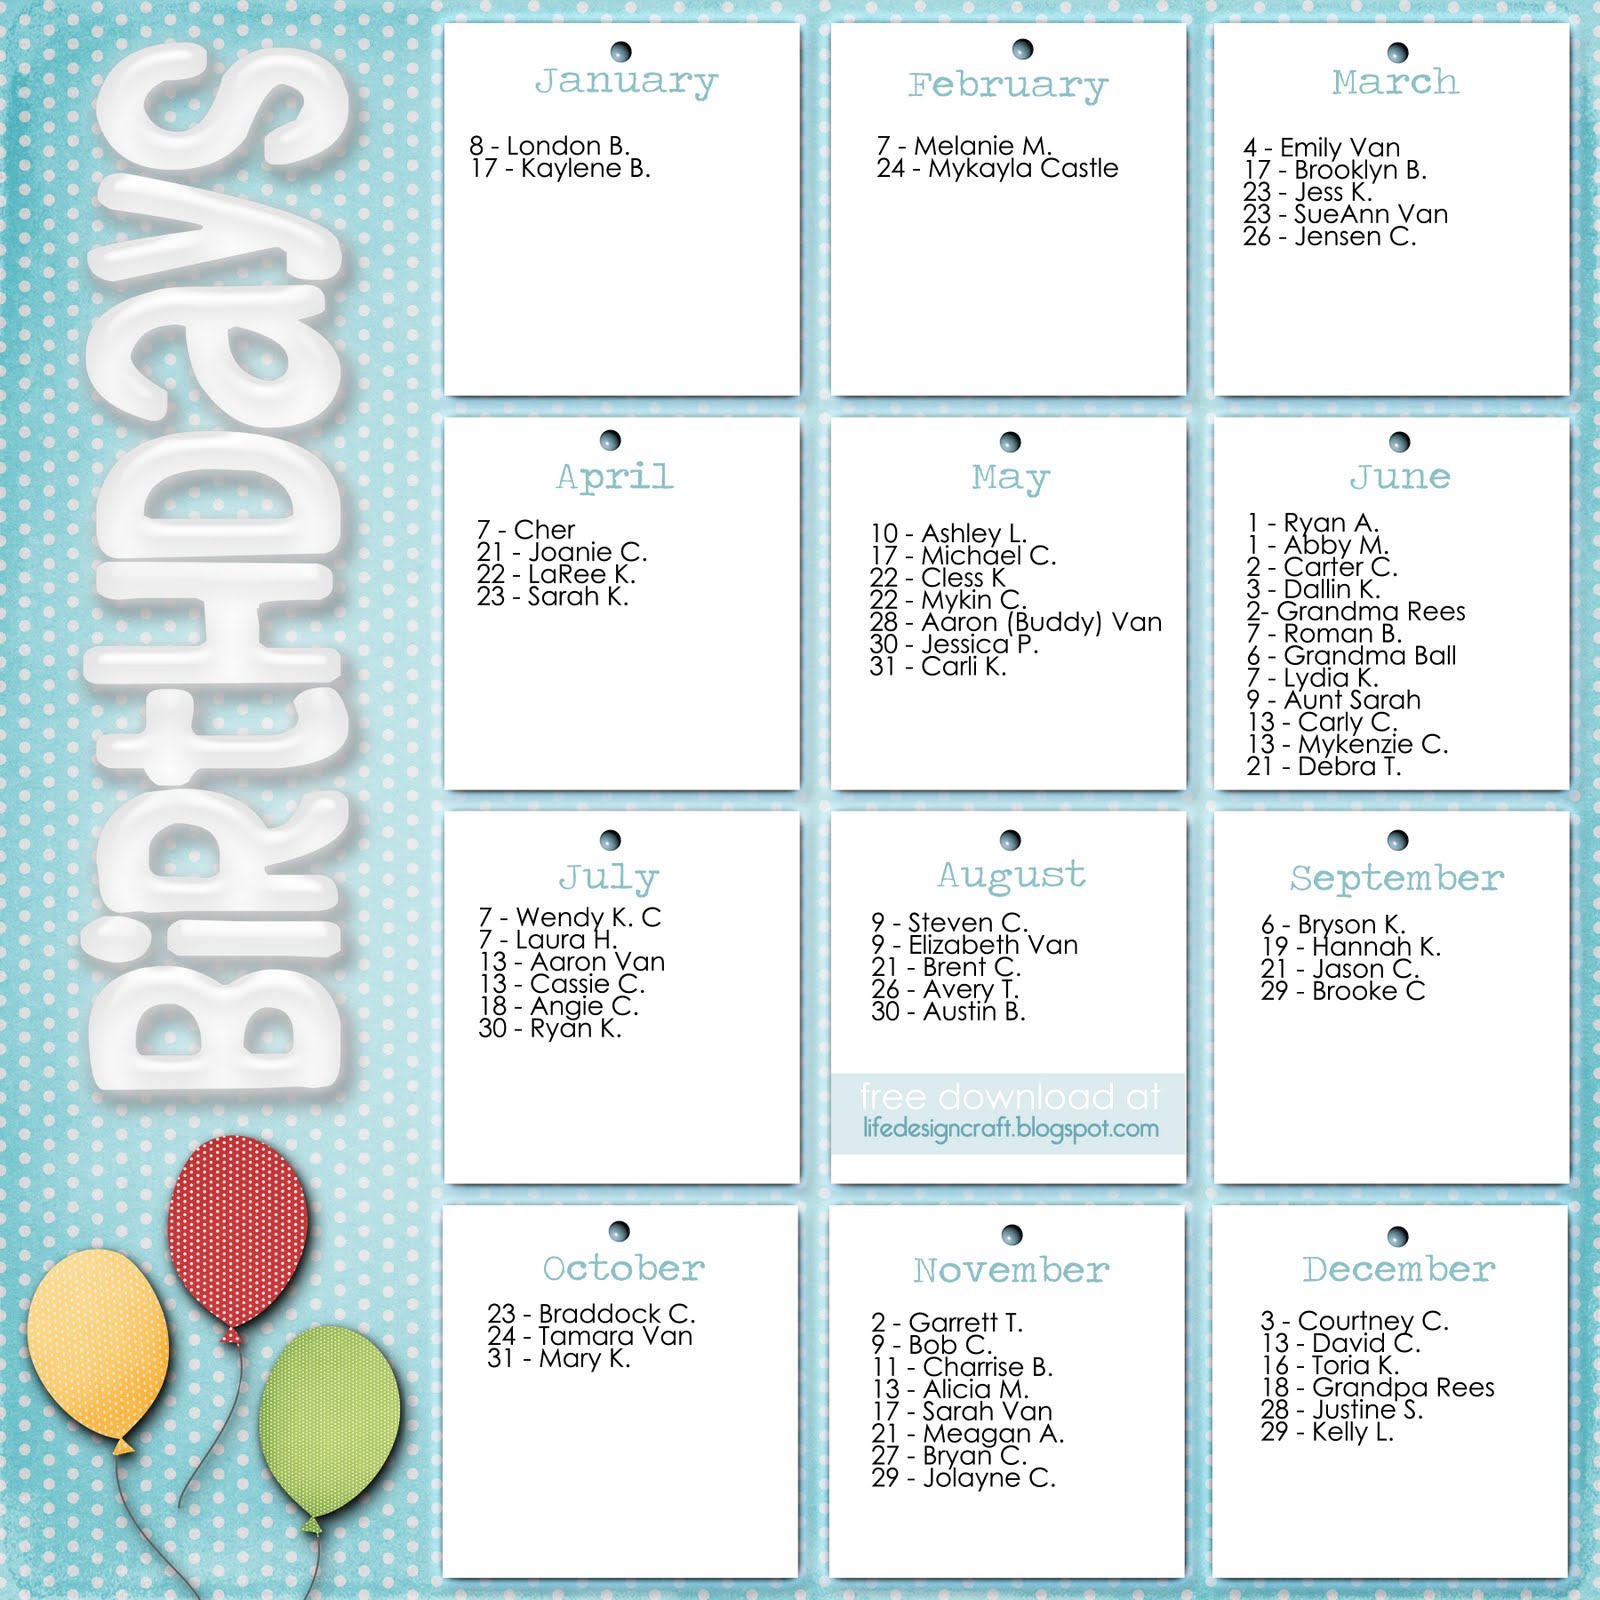 life-design-and-the-pursuit-of-craftiness-birthday-calendar-template